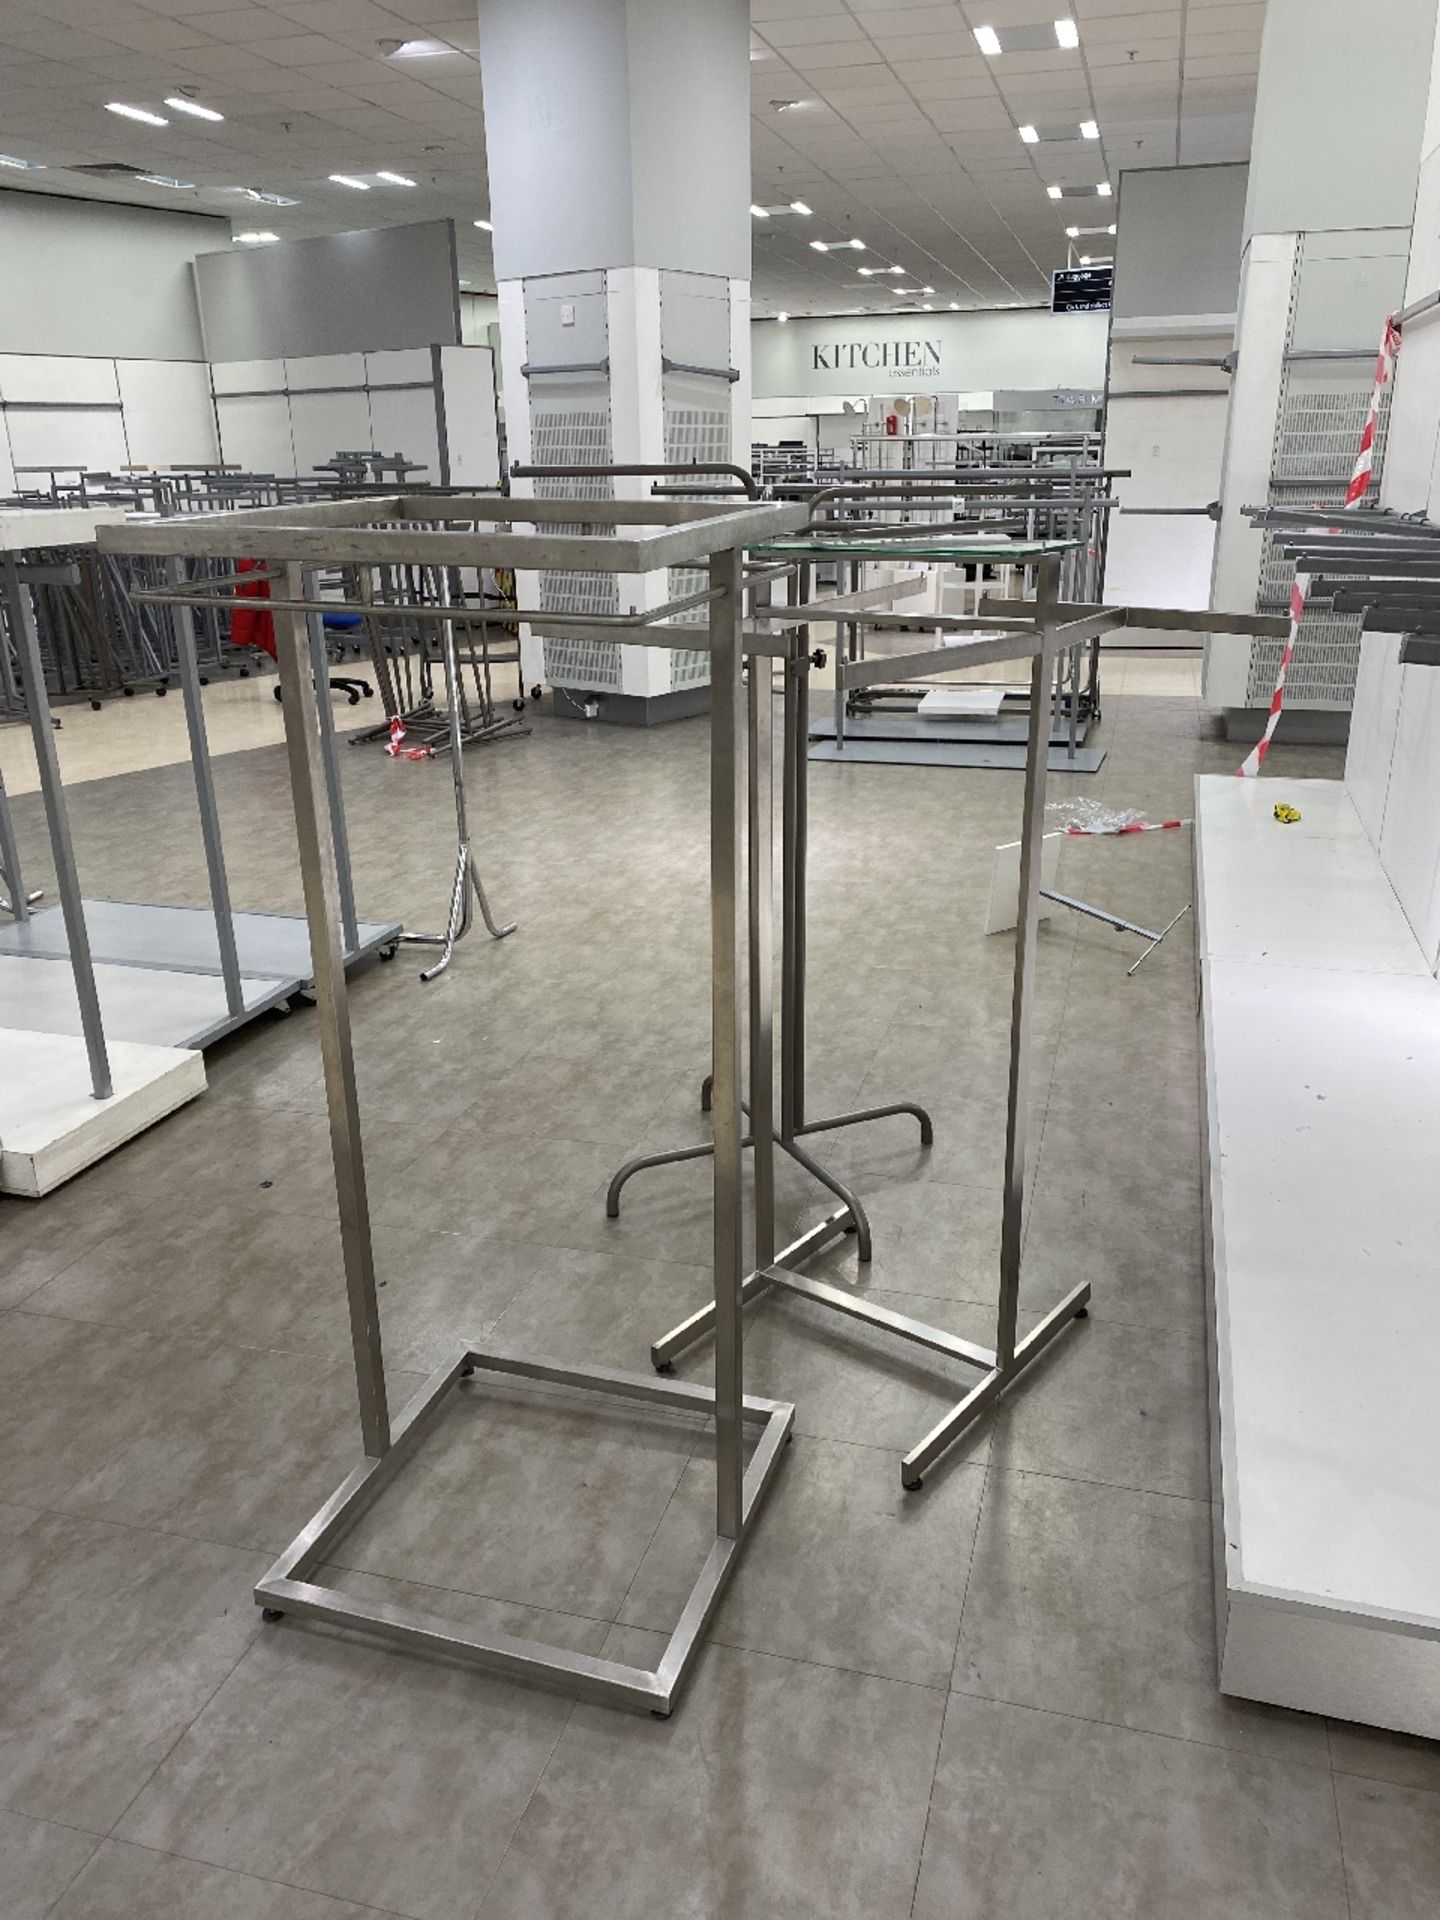 X3 Stainless Steel Clothing Display Units - Image 2 of 2